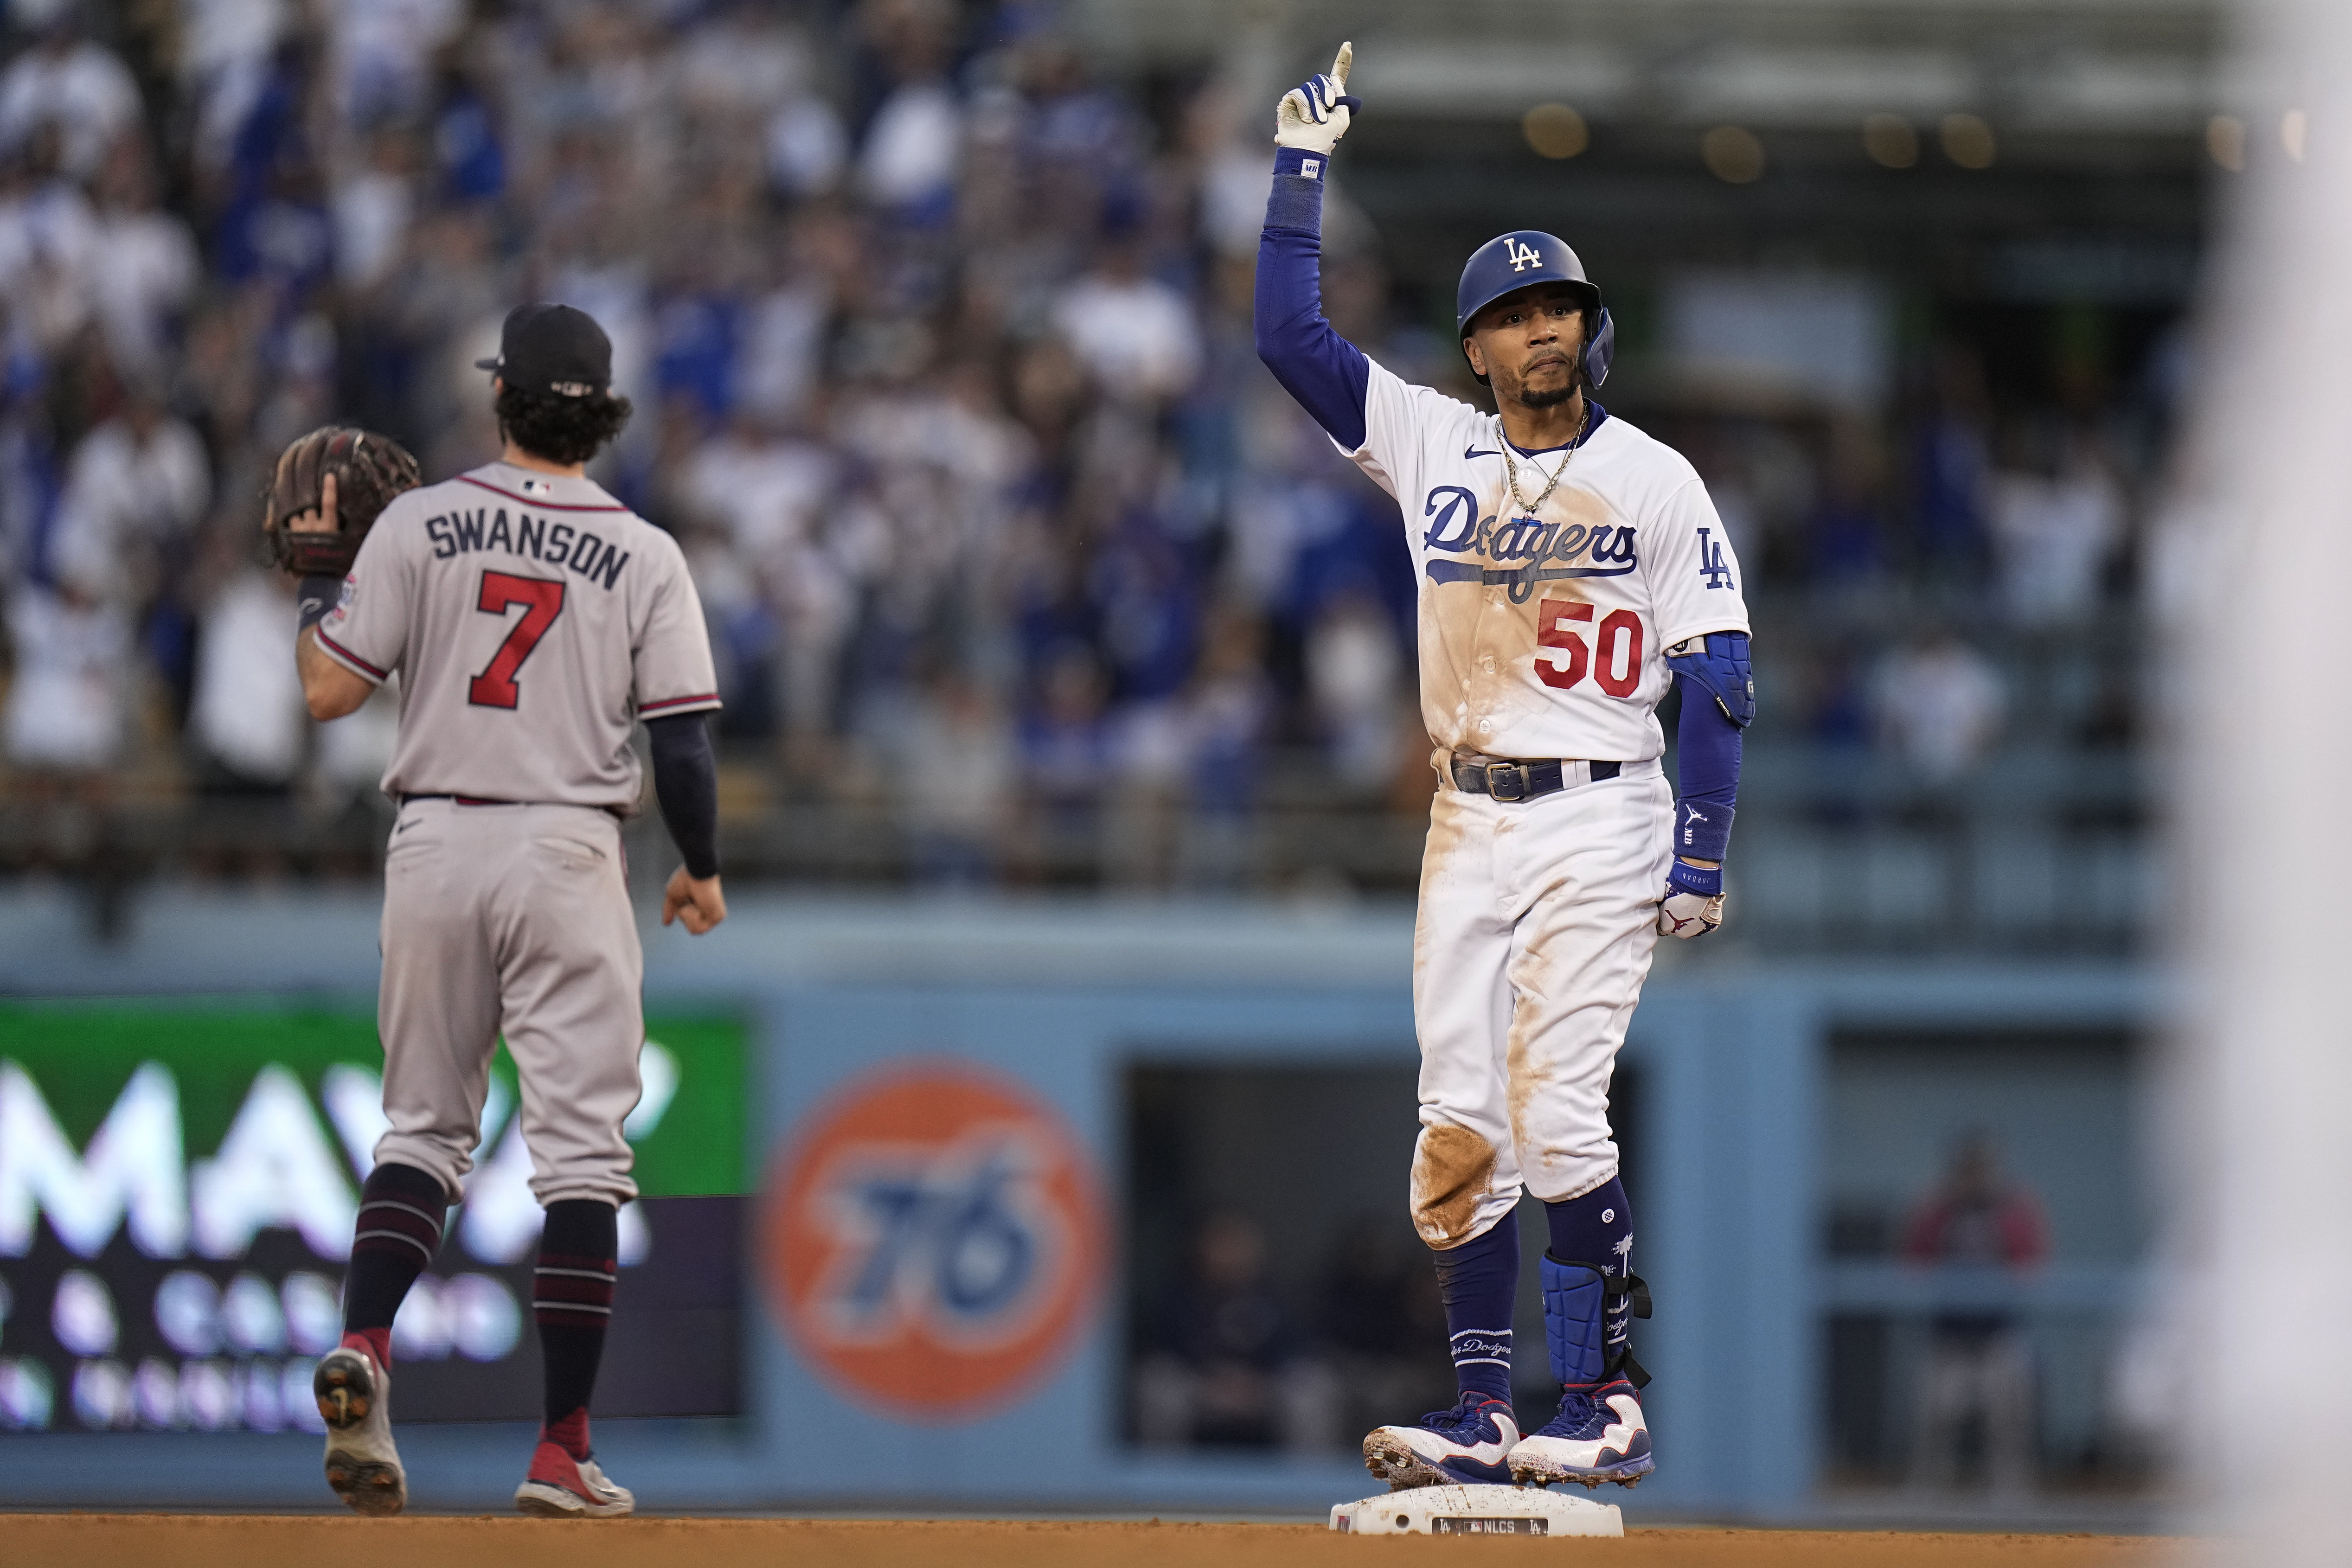 Late-night magic: Braves beat Dodgers 5-4, lead NLCS 2-0 - The